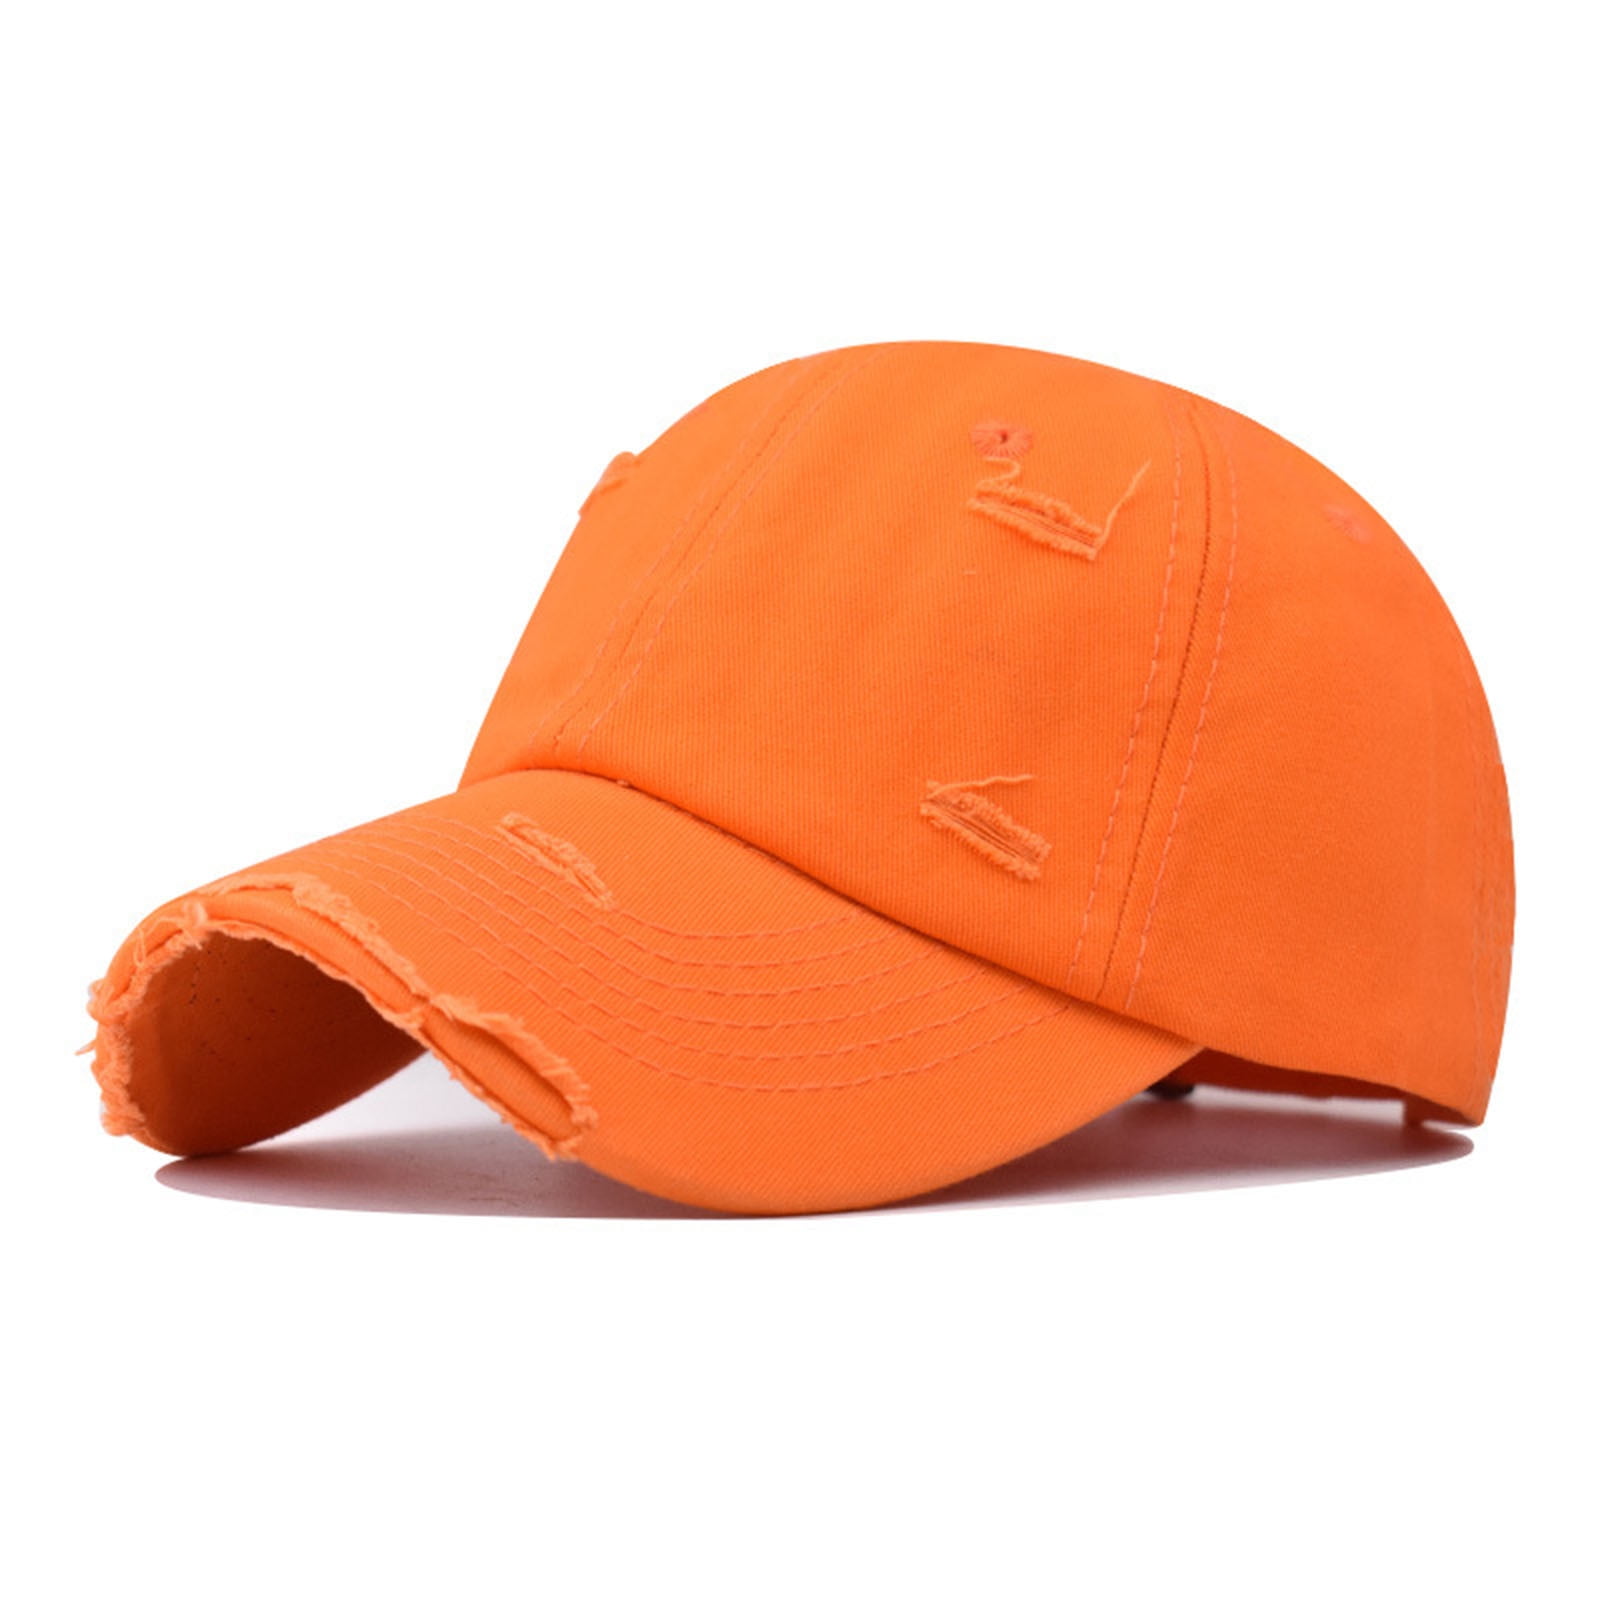 Sksloeg Hats for Men fashion Personalized Adjustable Trucker Caps Casual  Solid Sun Shade Hat Design Your Unique Hat,Orange One Size